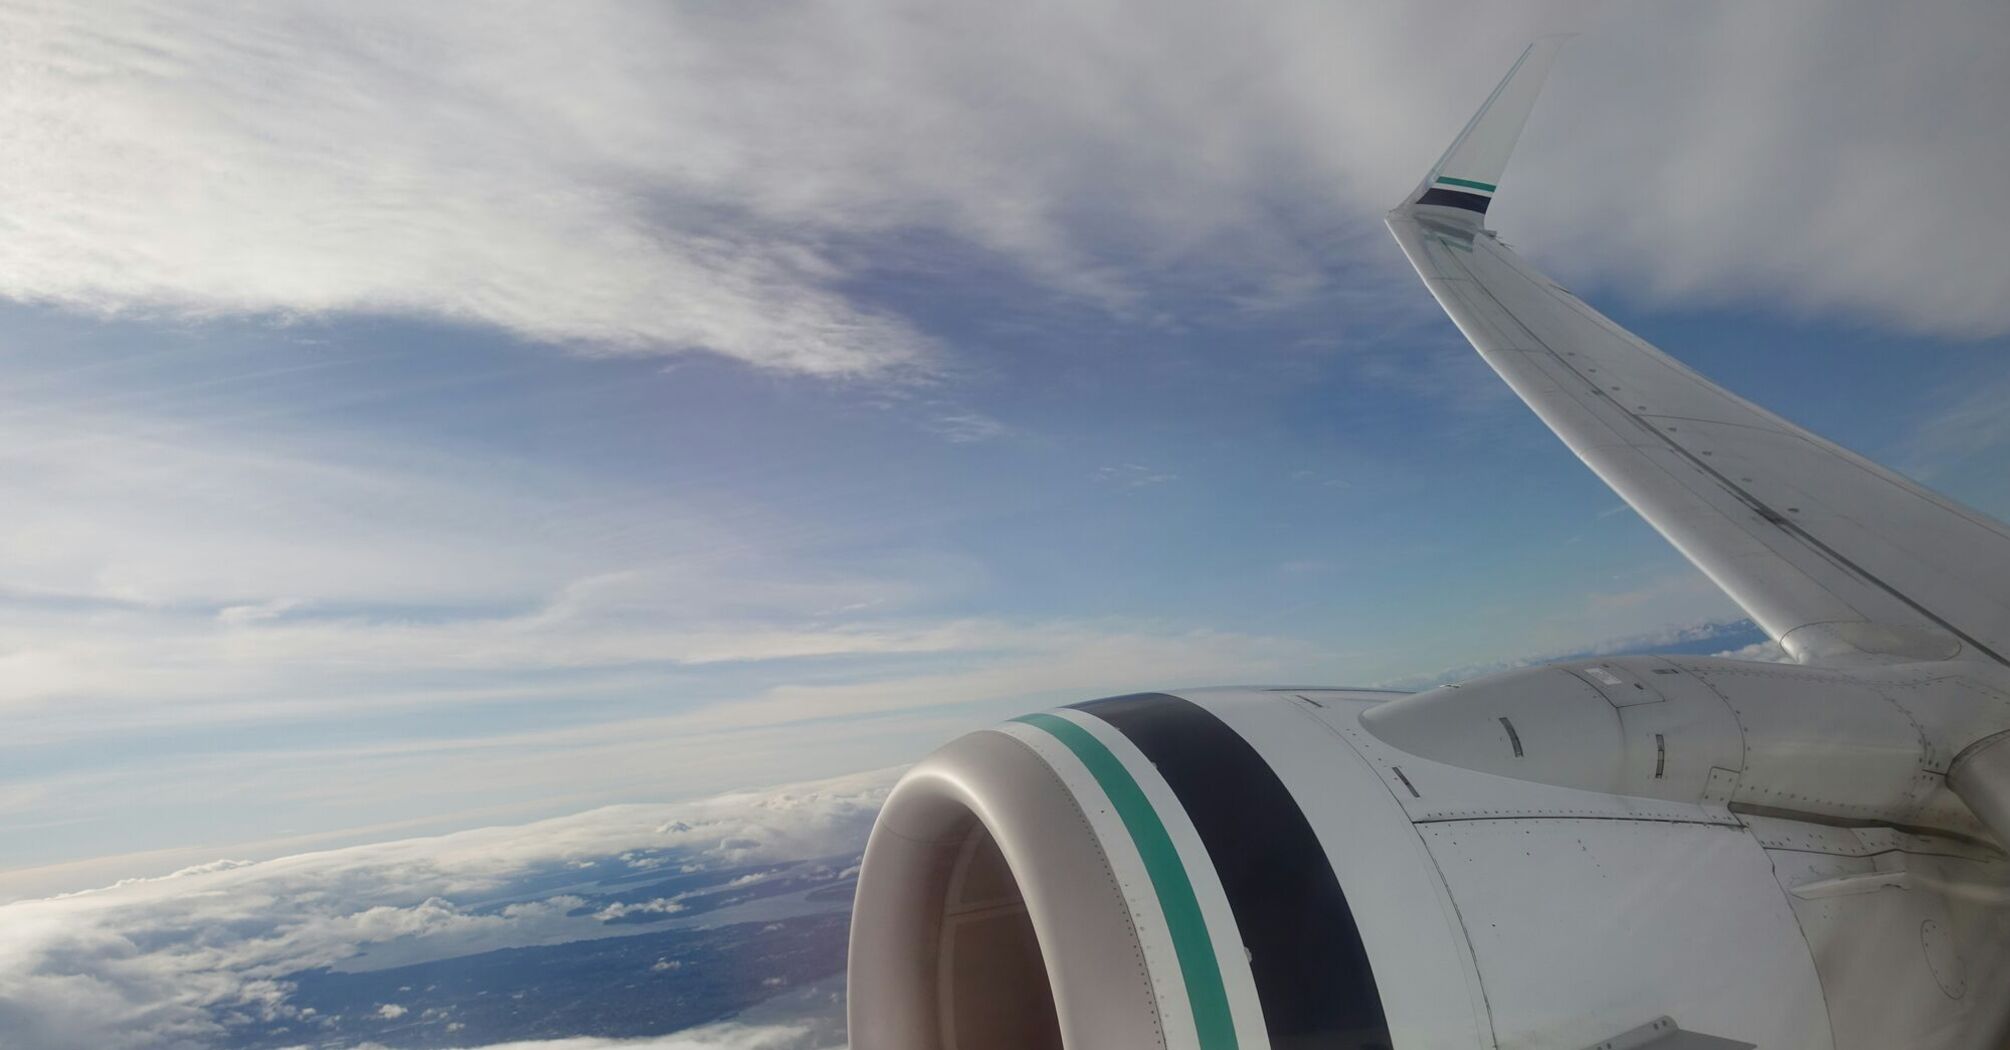 View from an Alaska Airlines plane window showing the wing and engine against a backdrop of clouds and sky